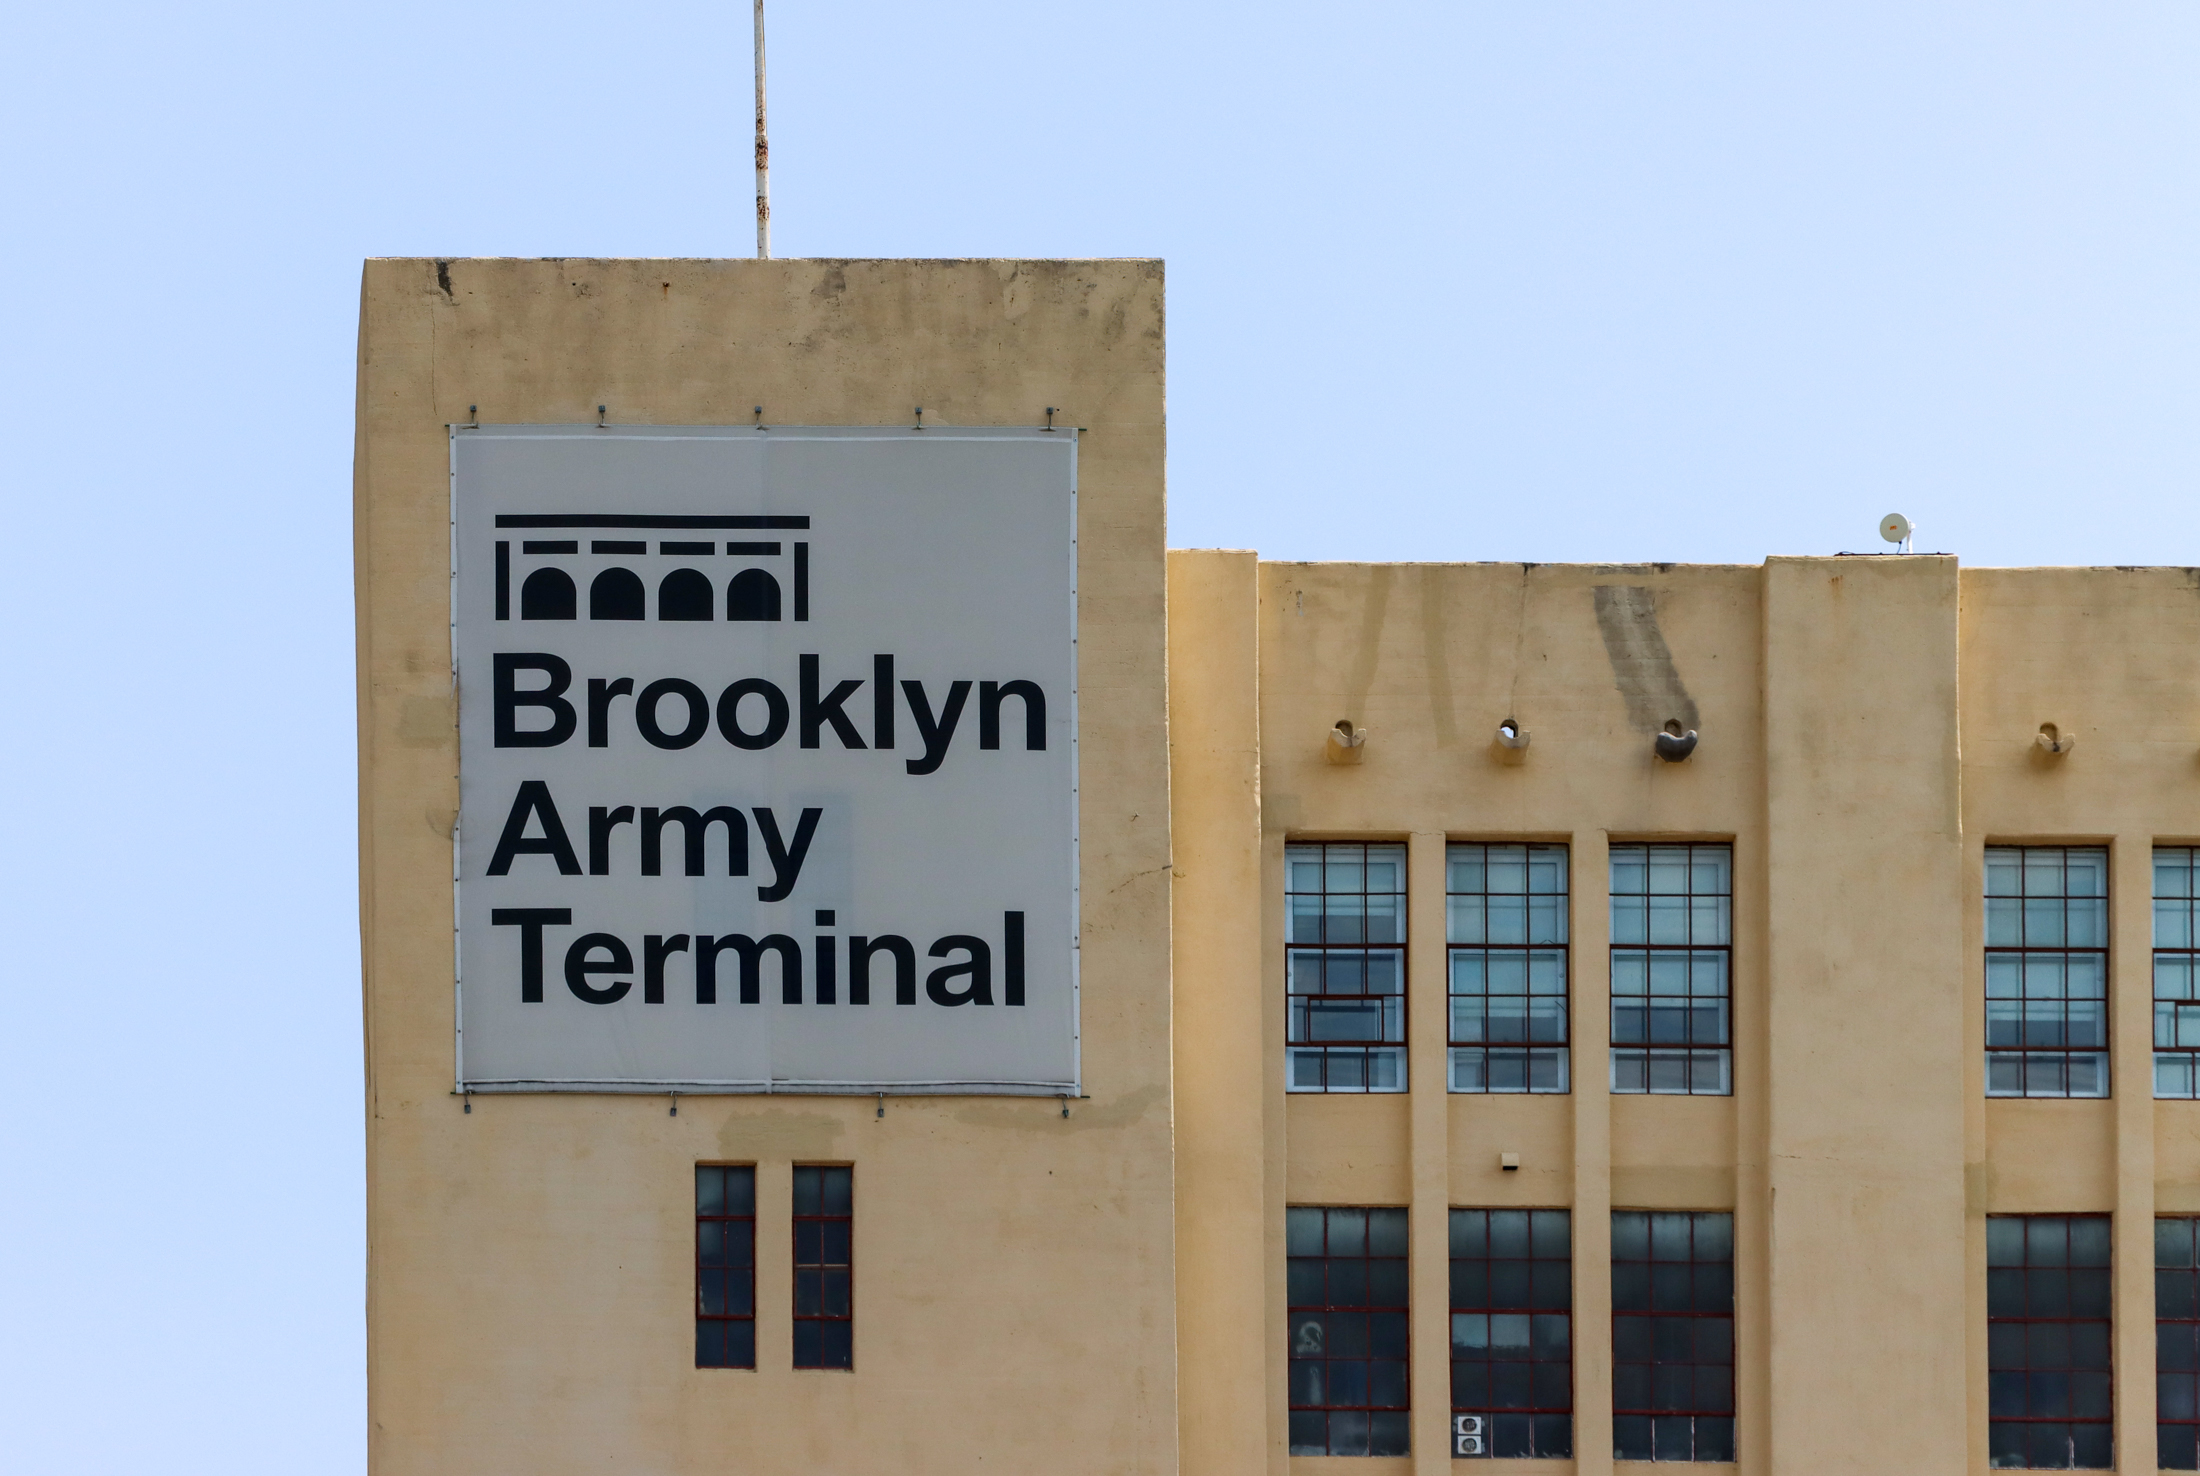 brooklyn army terminal - tower with sign for the terminal